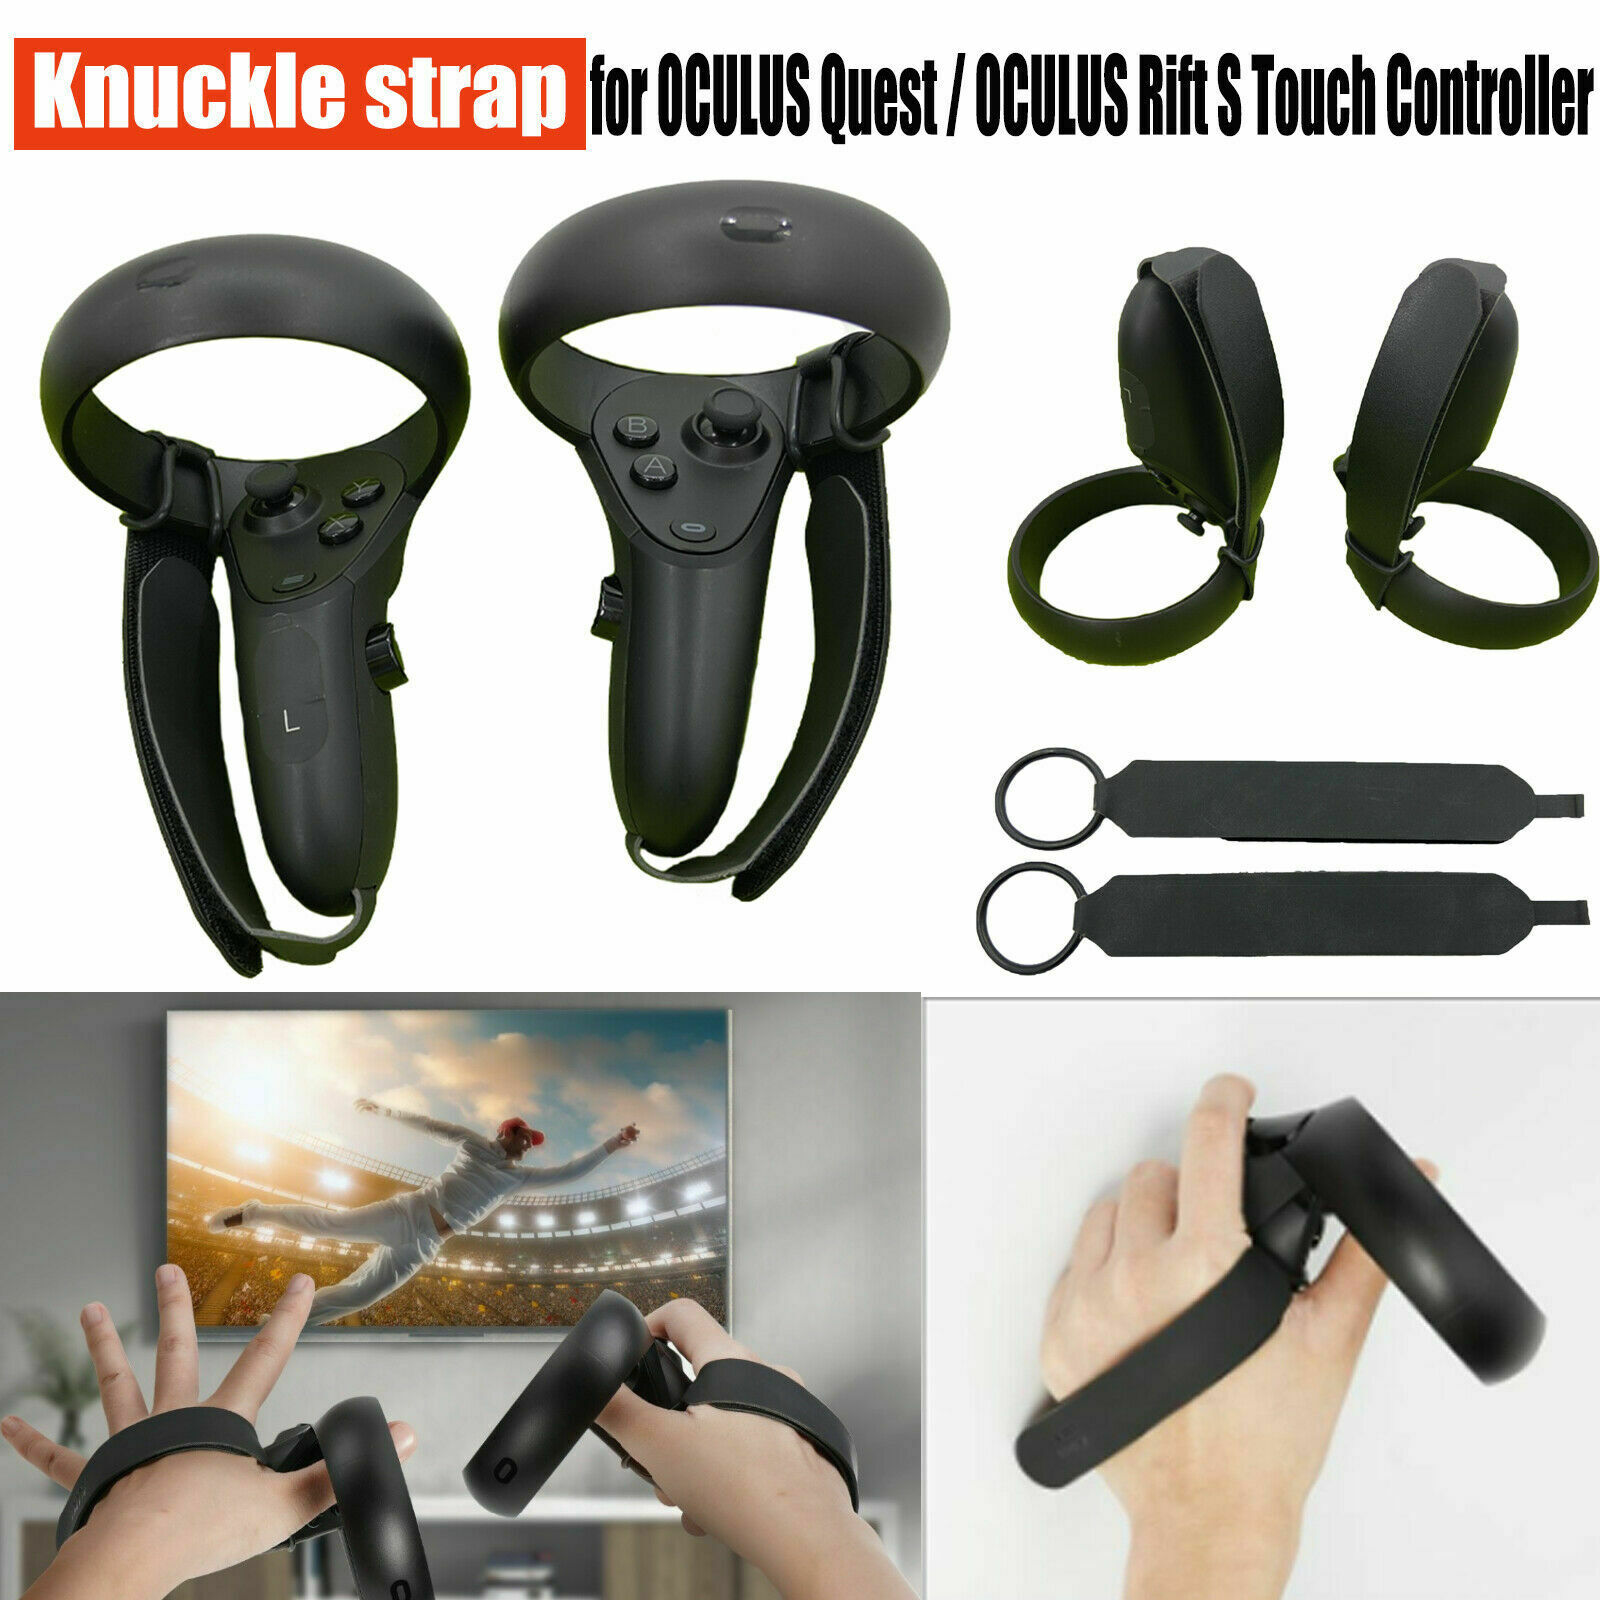 Adjustable Knuckle Strap For Oculus Quest / Rift S Touch Controller Accessories